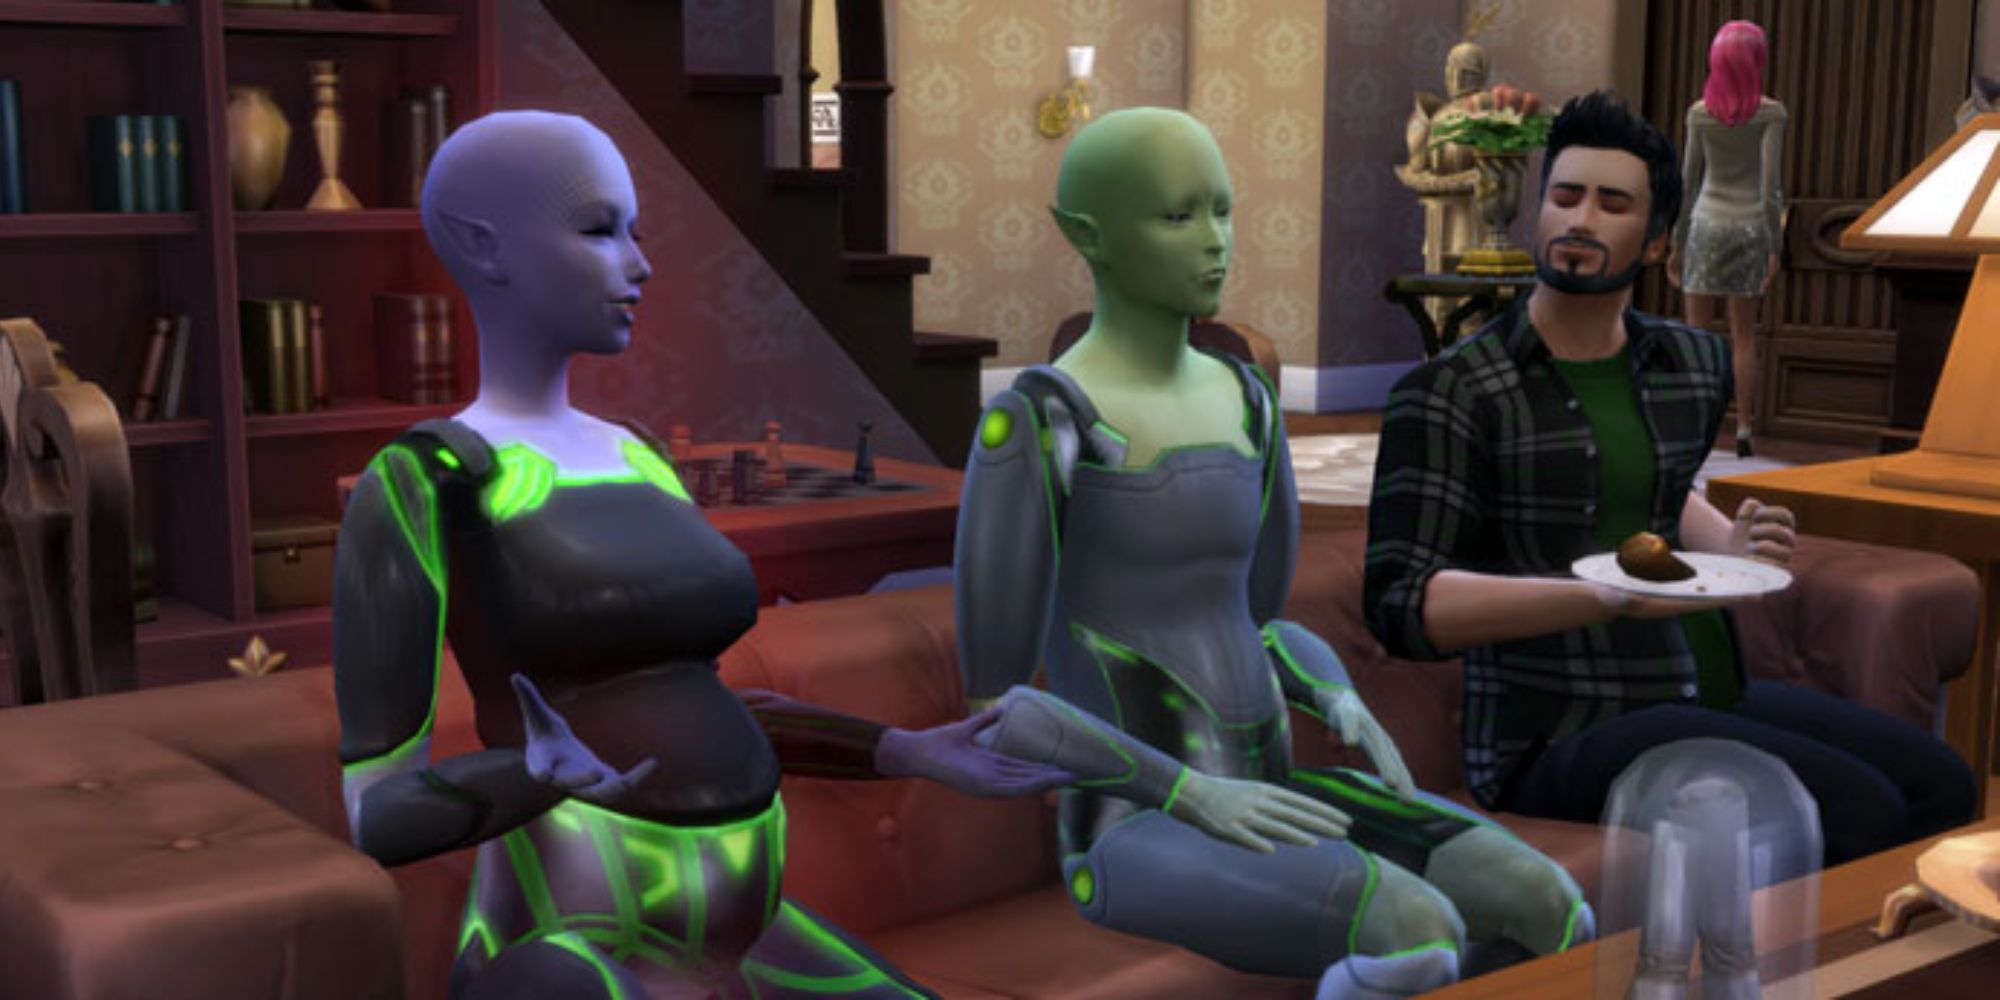 The Sims 4 Alien Sitting On A Couch Talking